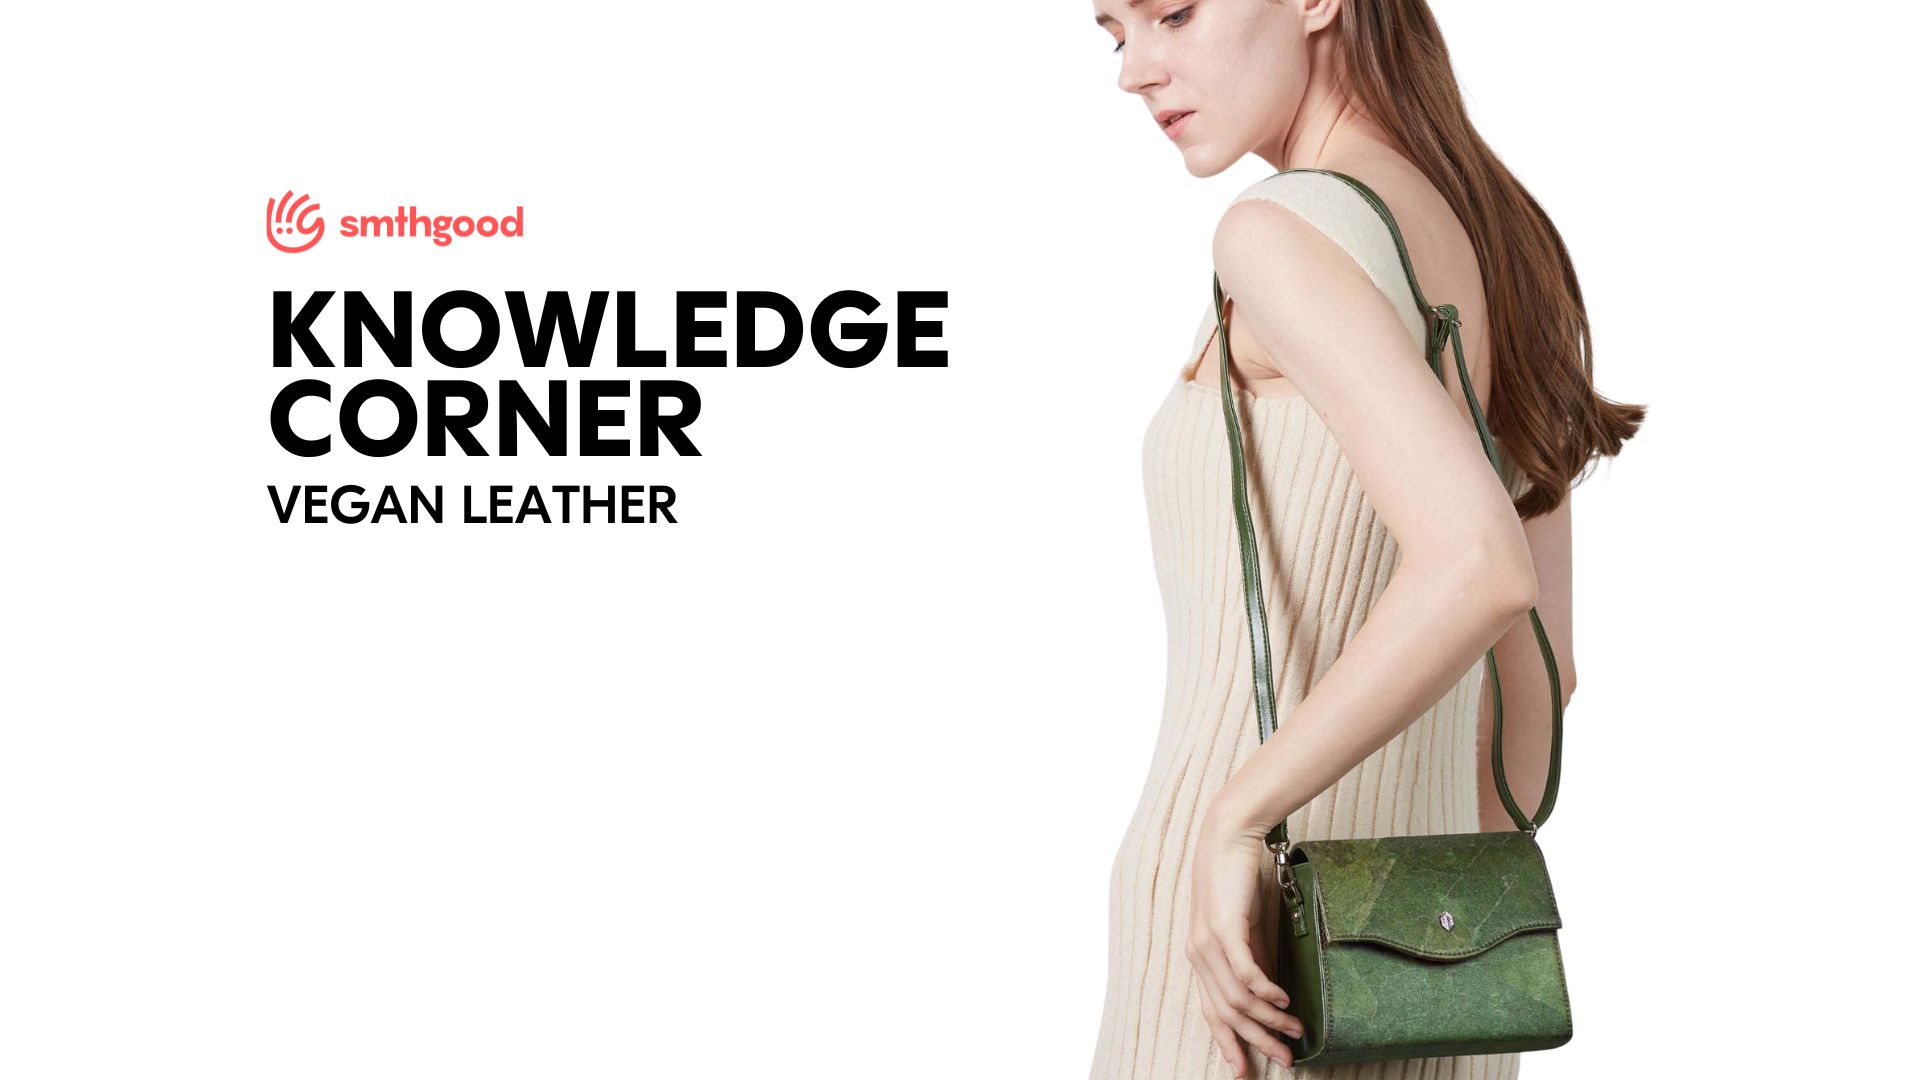 What Is Vegan Leather and How Is It Made?